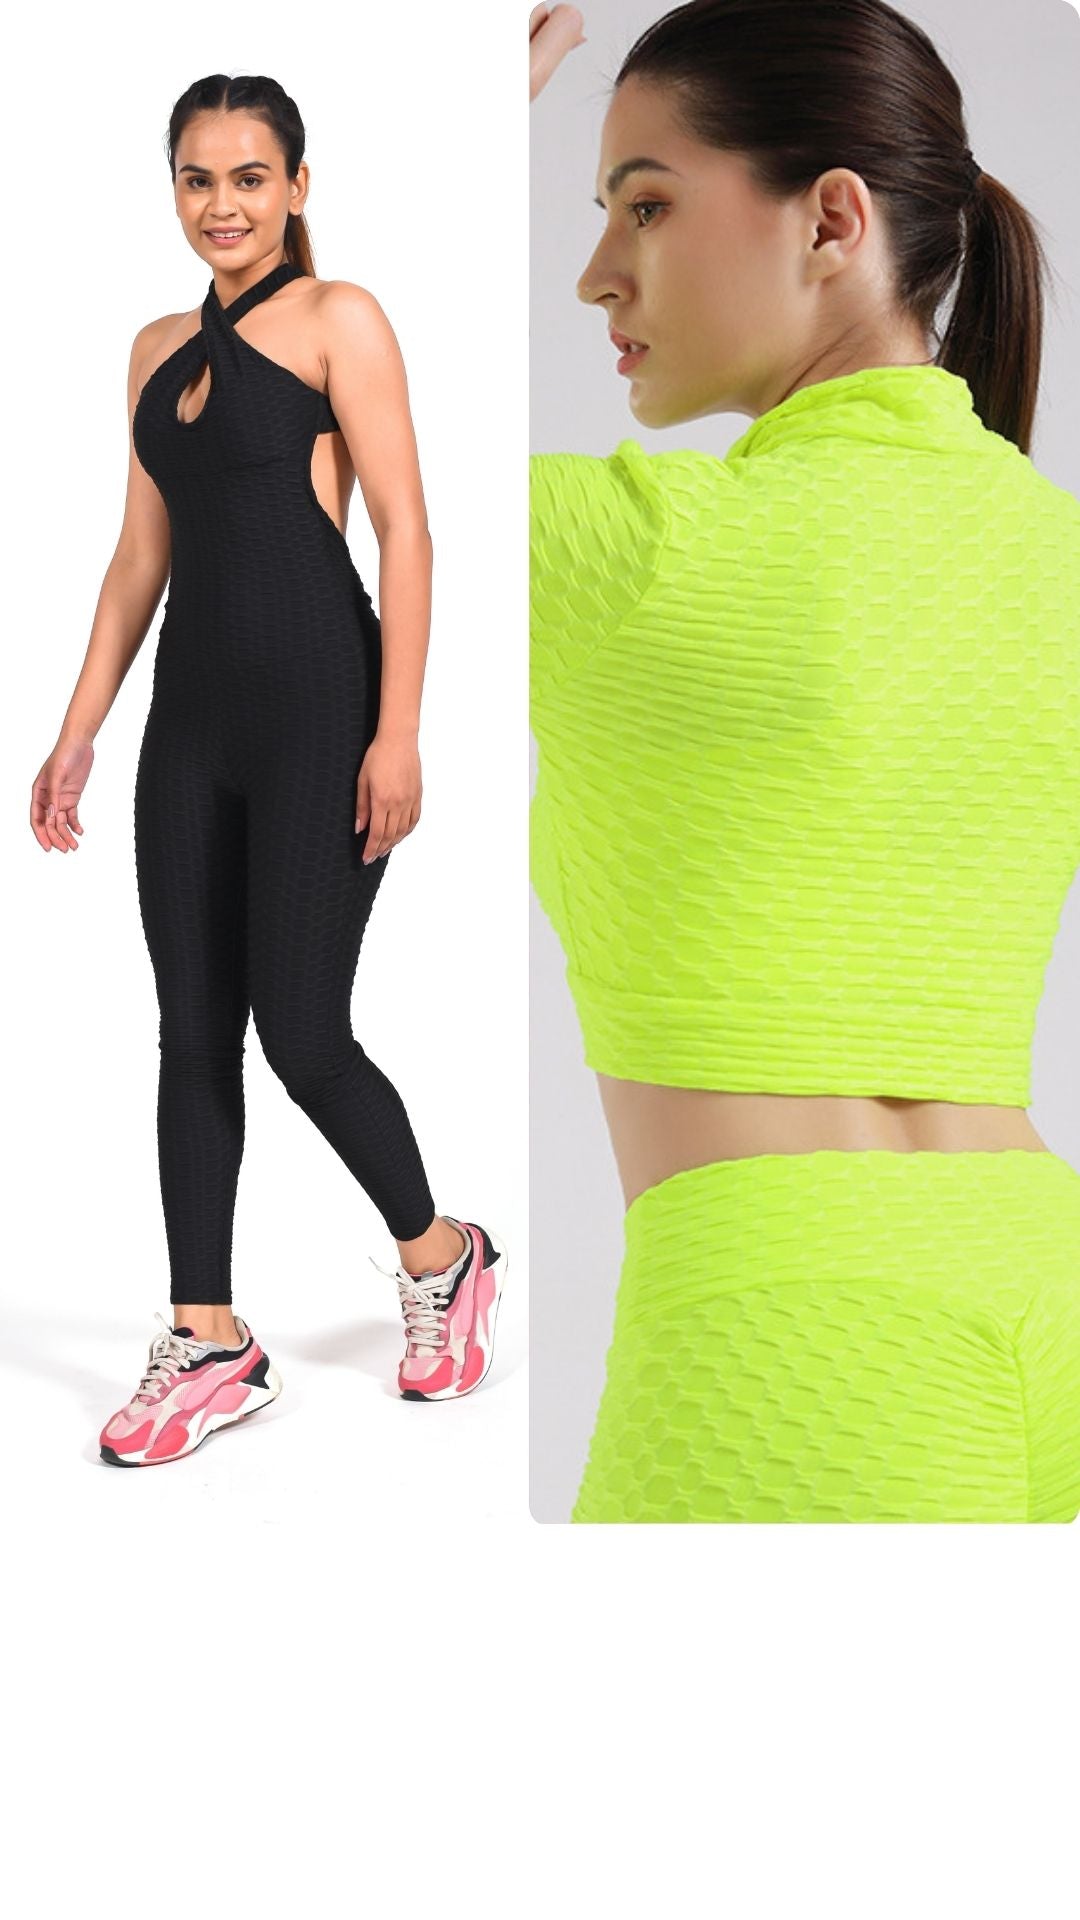 GYMSQUAD® COMBO OF ANTI-CELLULITE AND PUSH UP BLACK JUMPSUIT & YELLOW/NEON GREEN JACKET